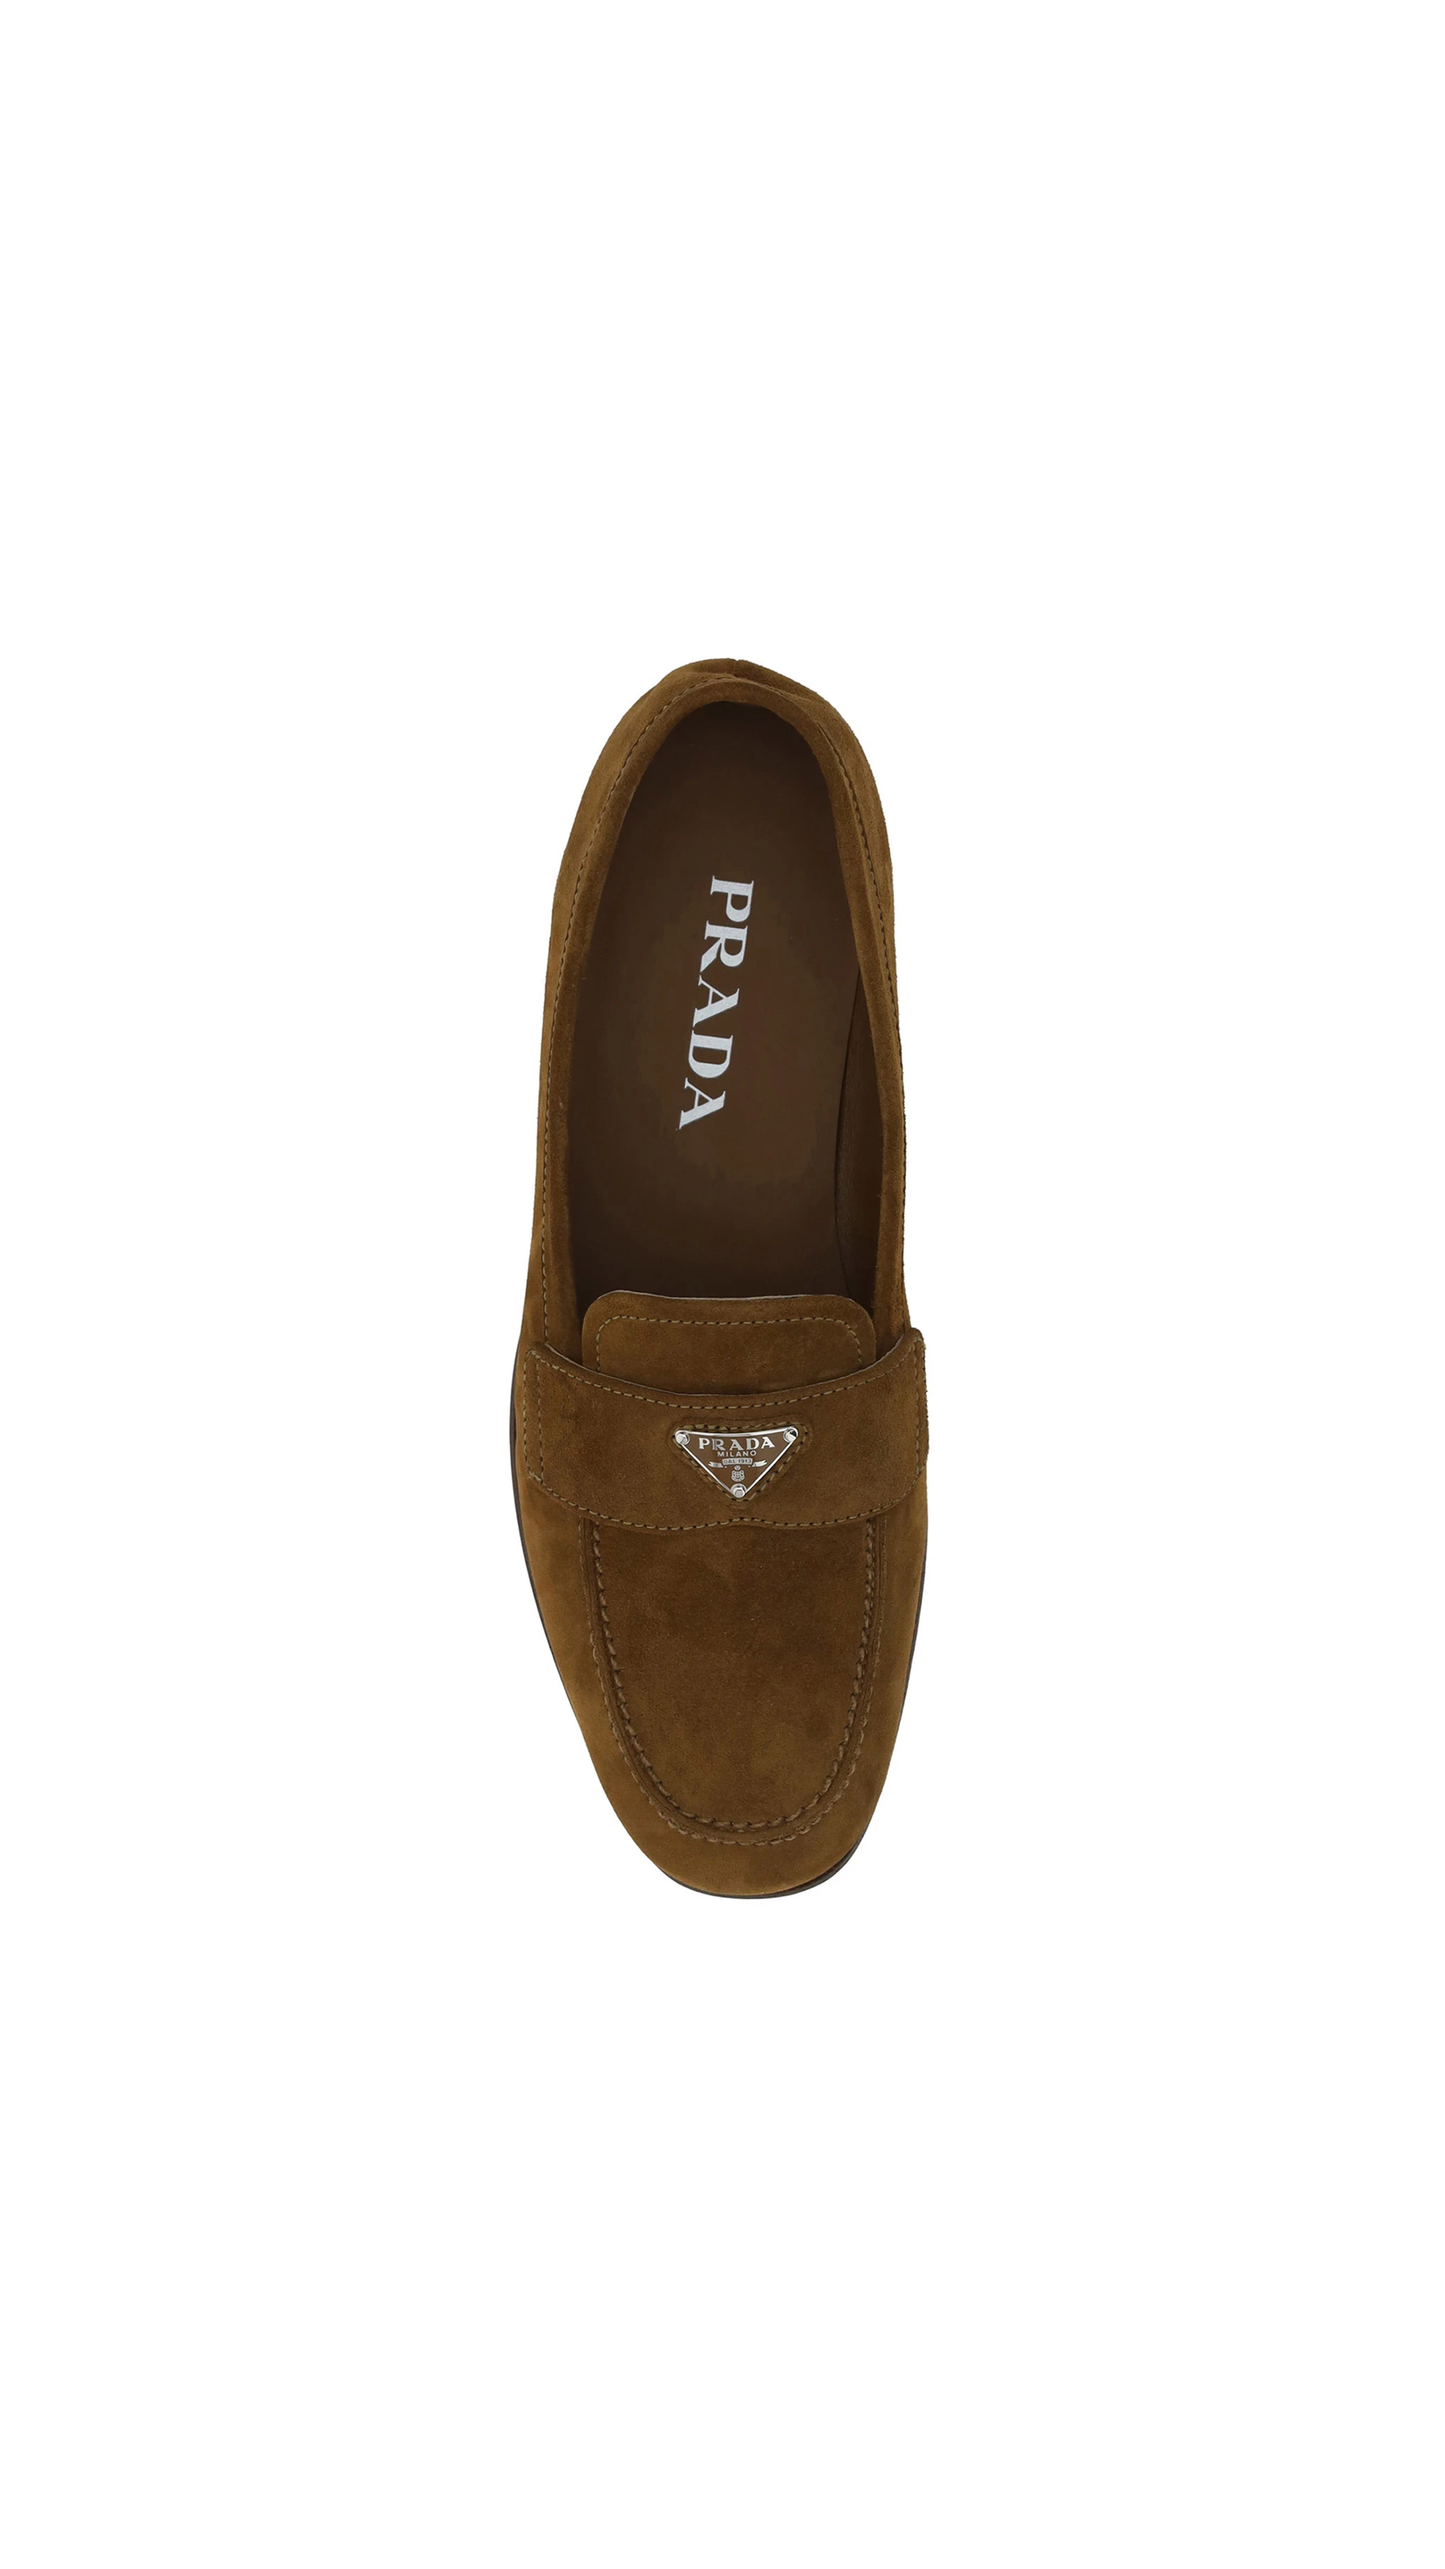 Suede Leather Loafers - Tobacco